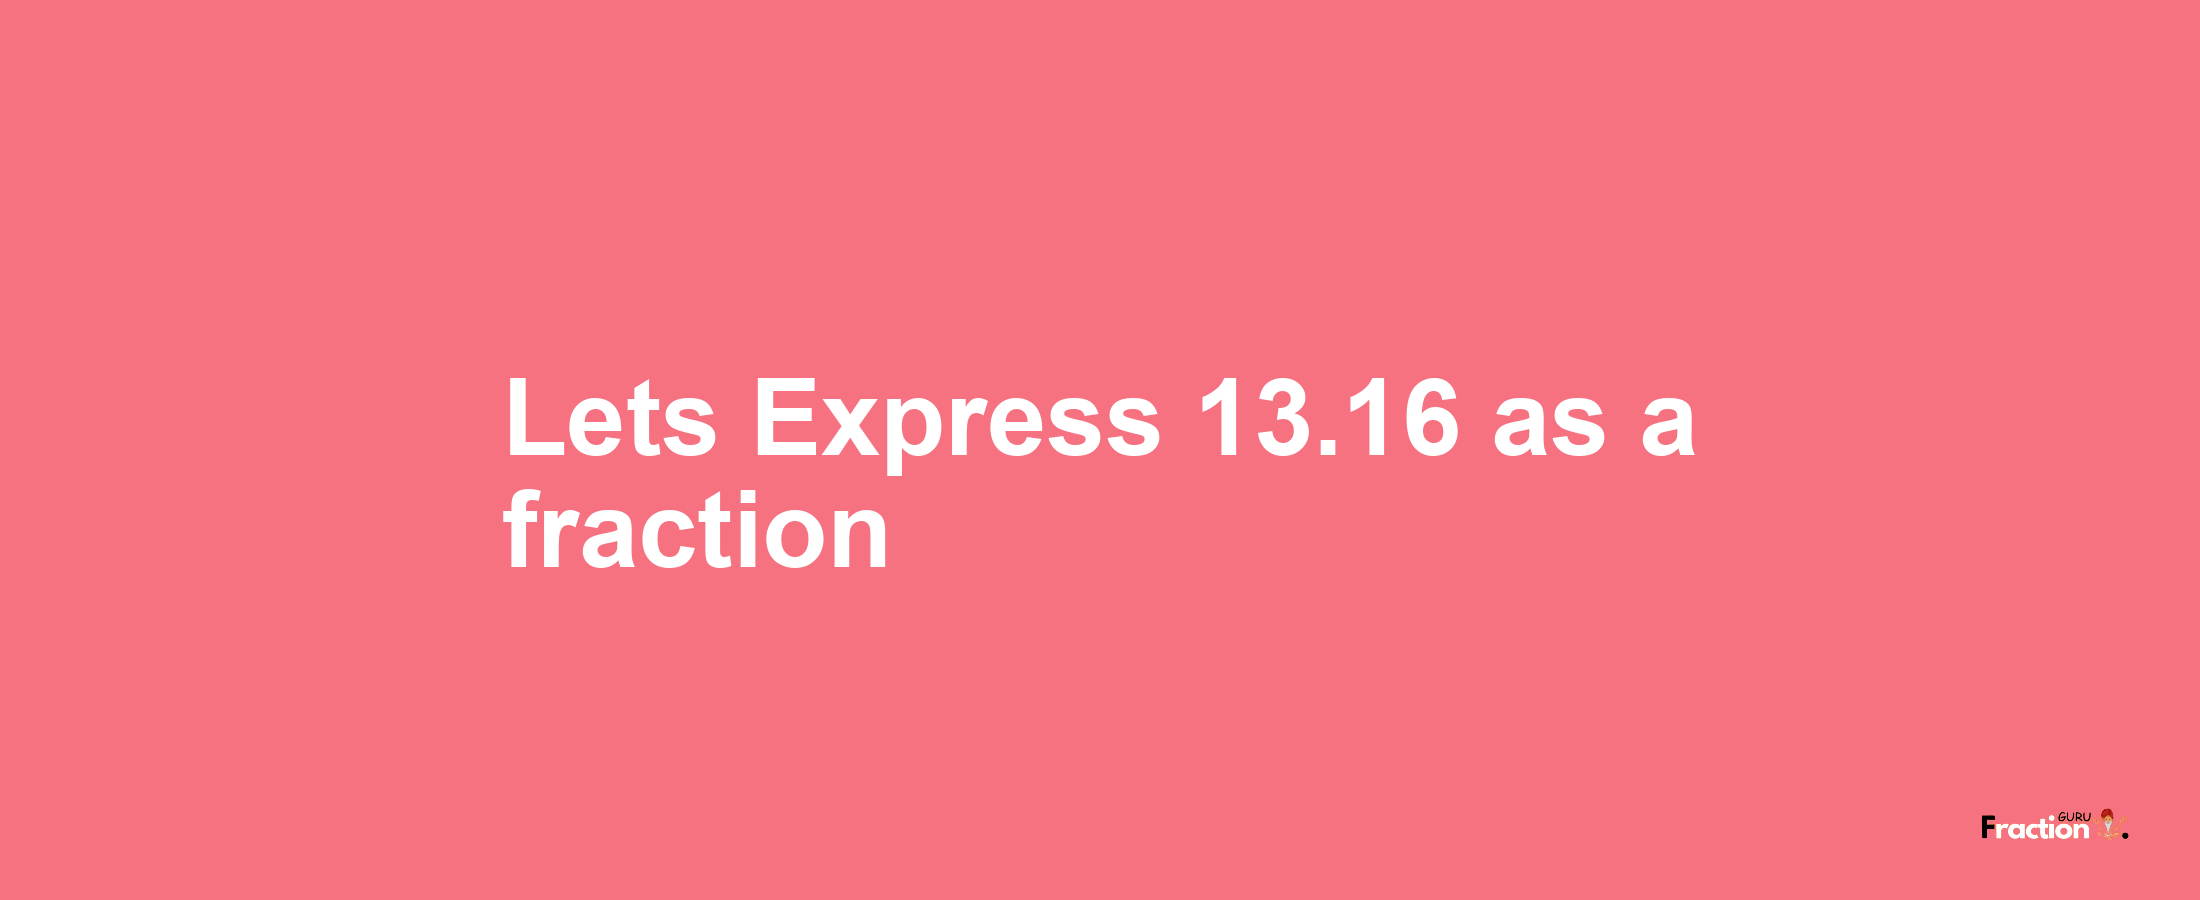 Lets Express 13.16 as afraction